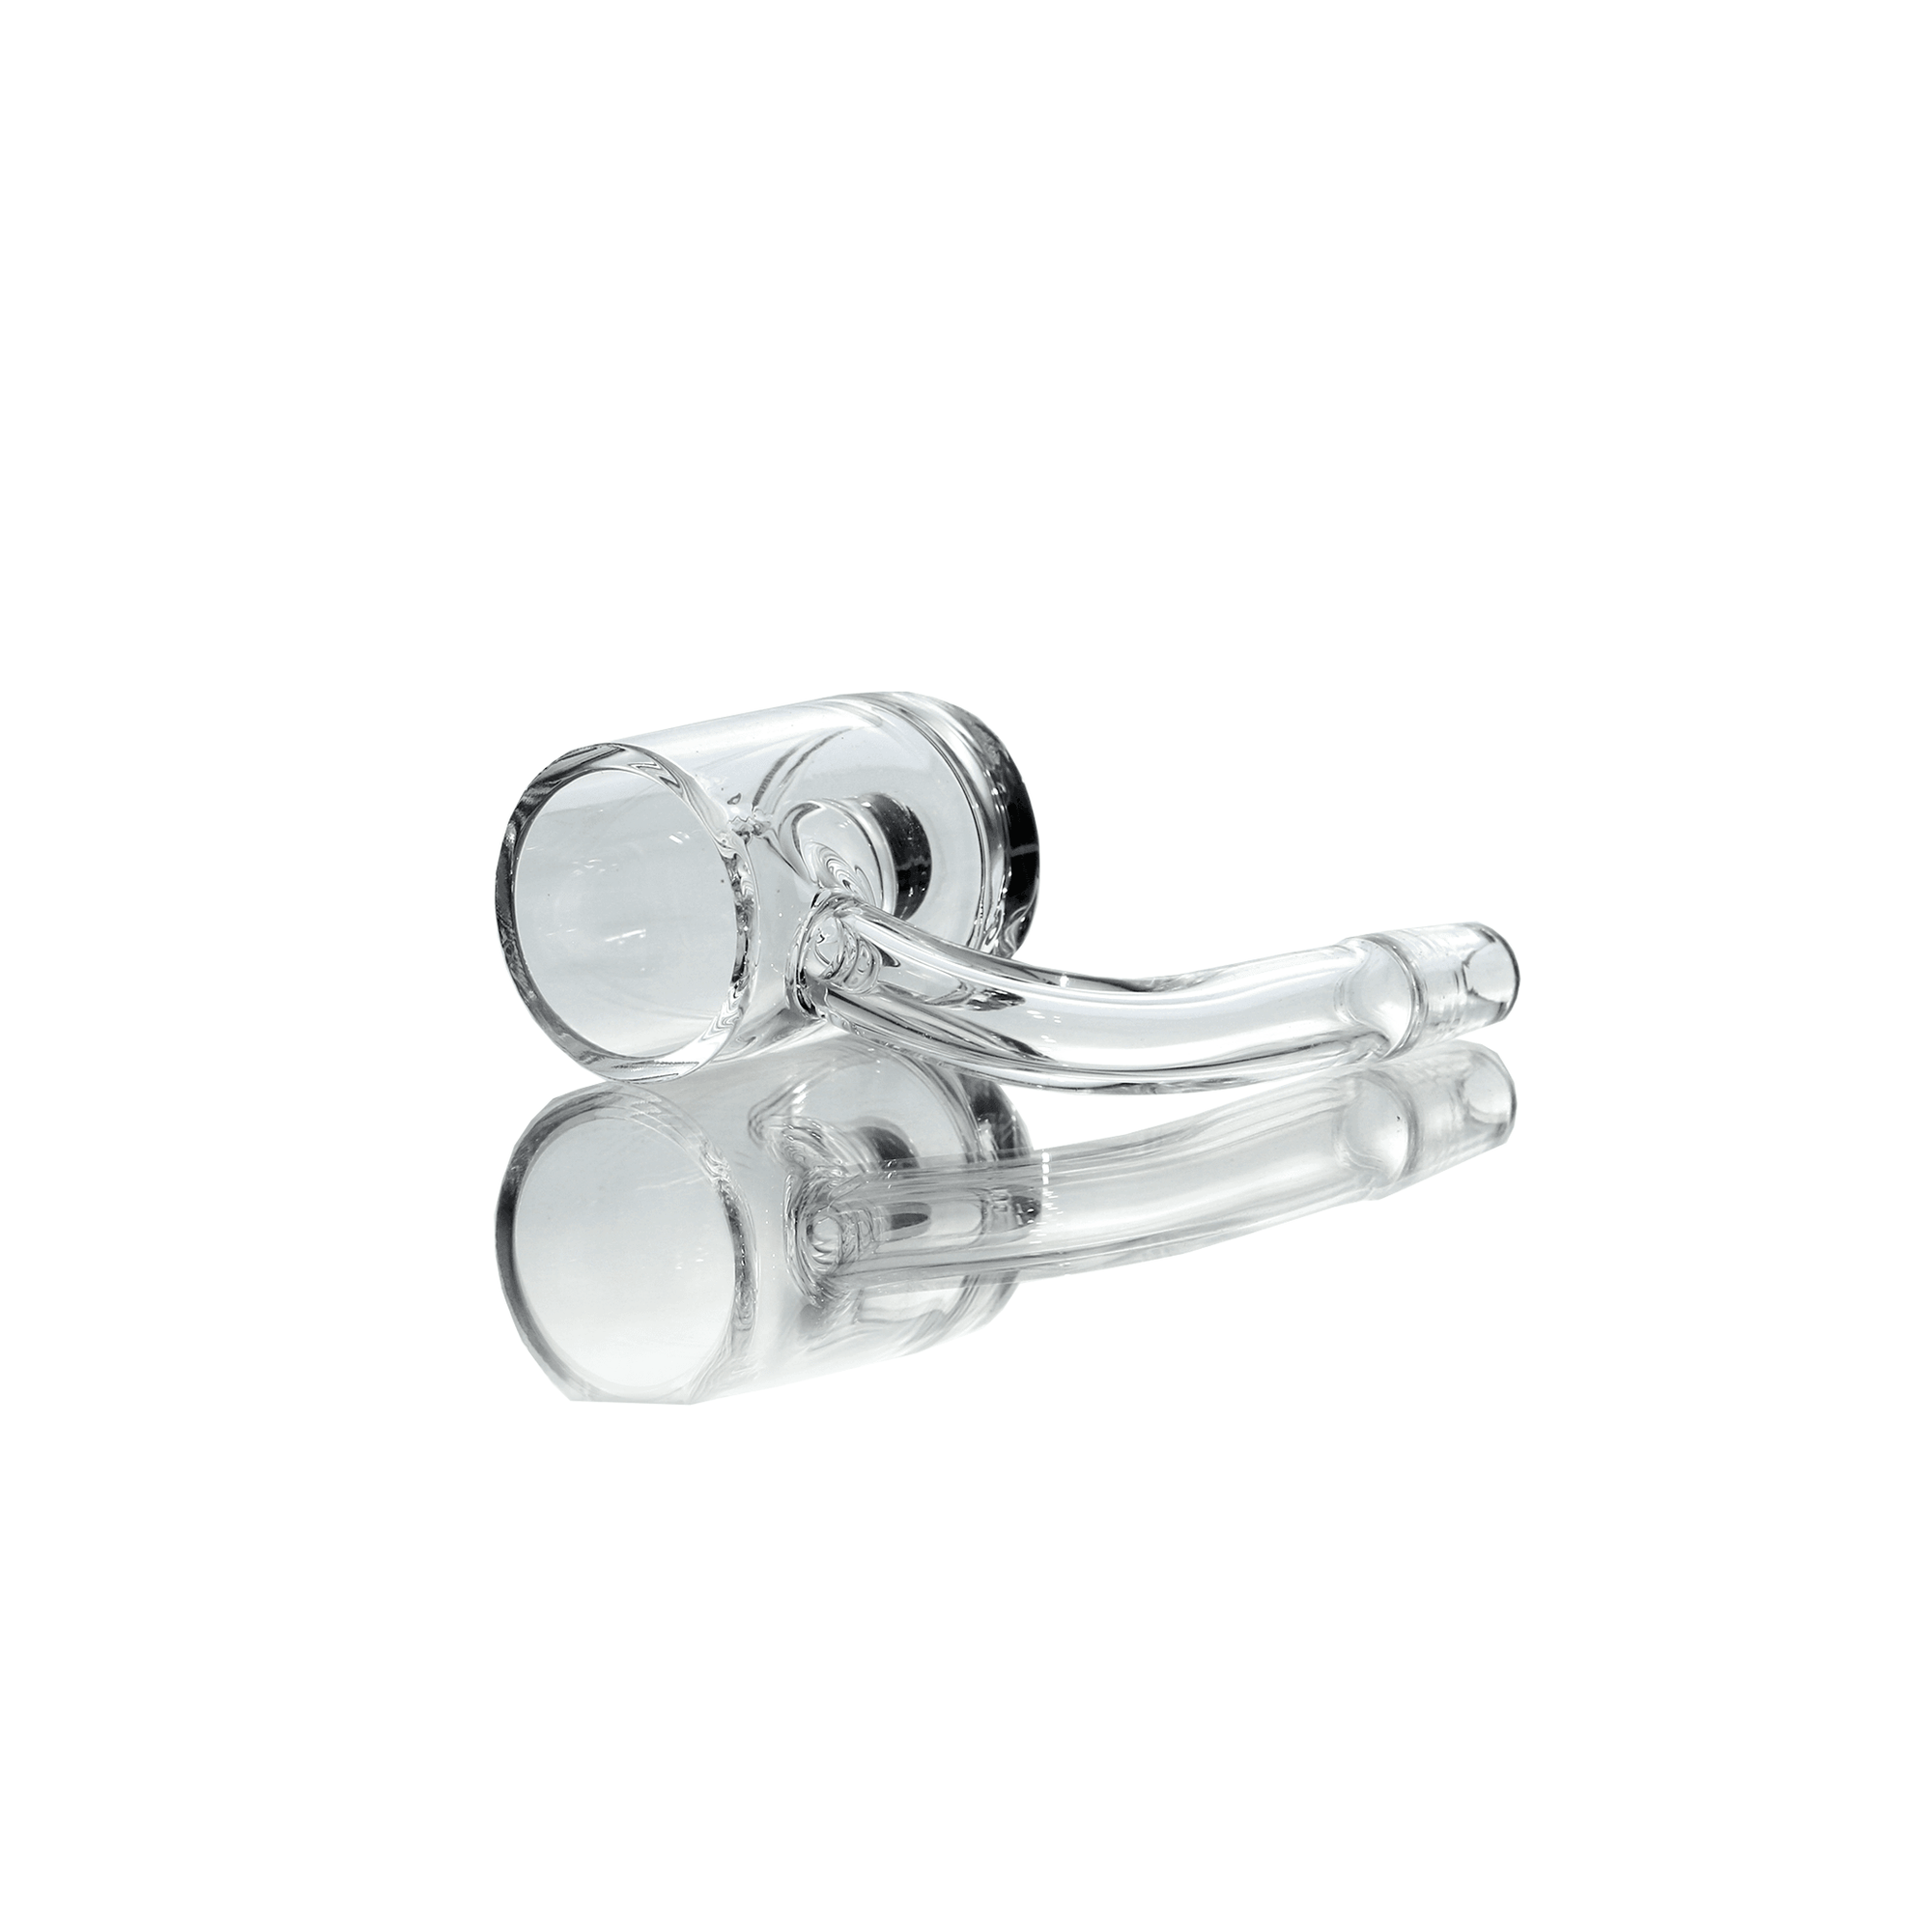 Quartz Banger Core Reactor 10mm Male With Saucer Cap | Prone Banger View | the dabbing specialists